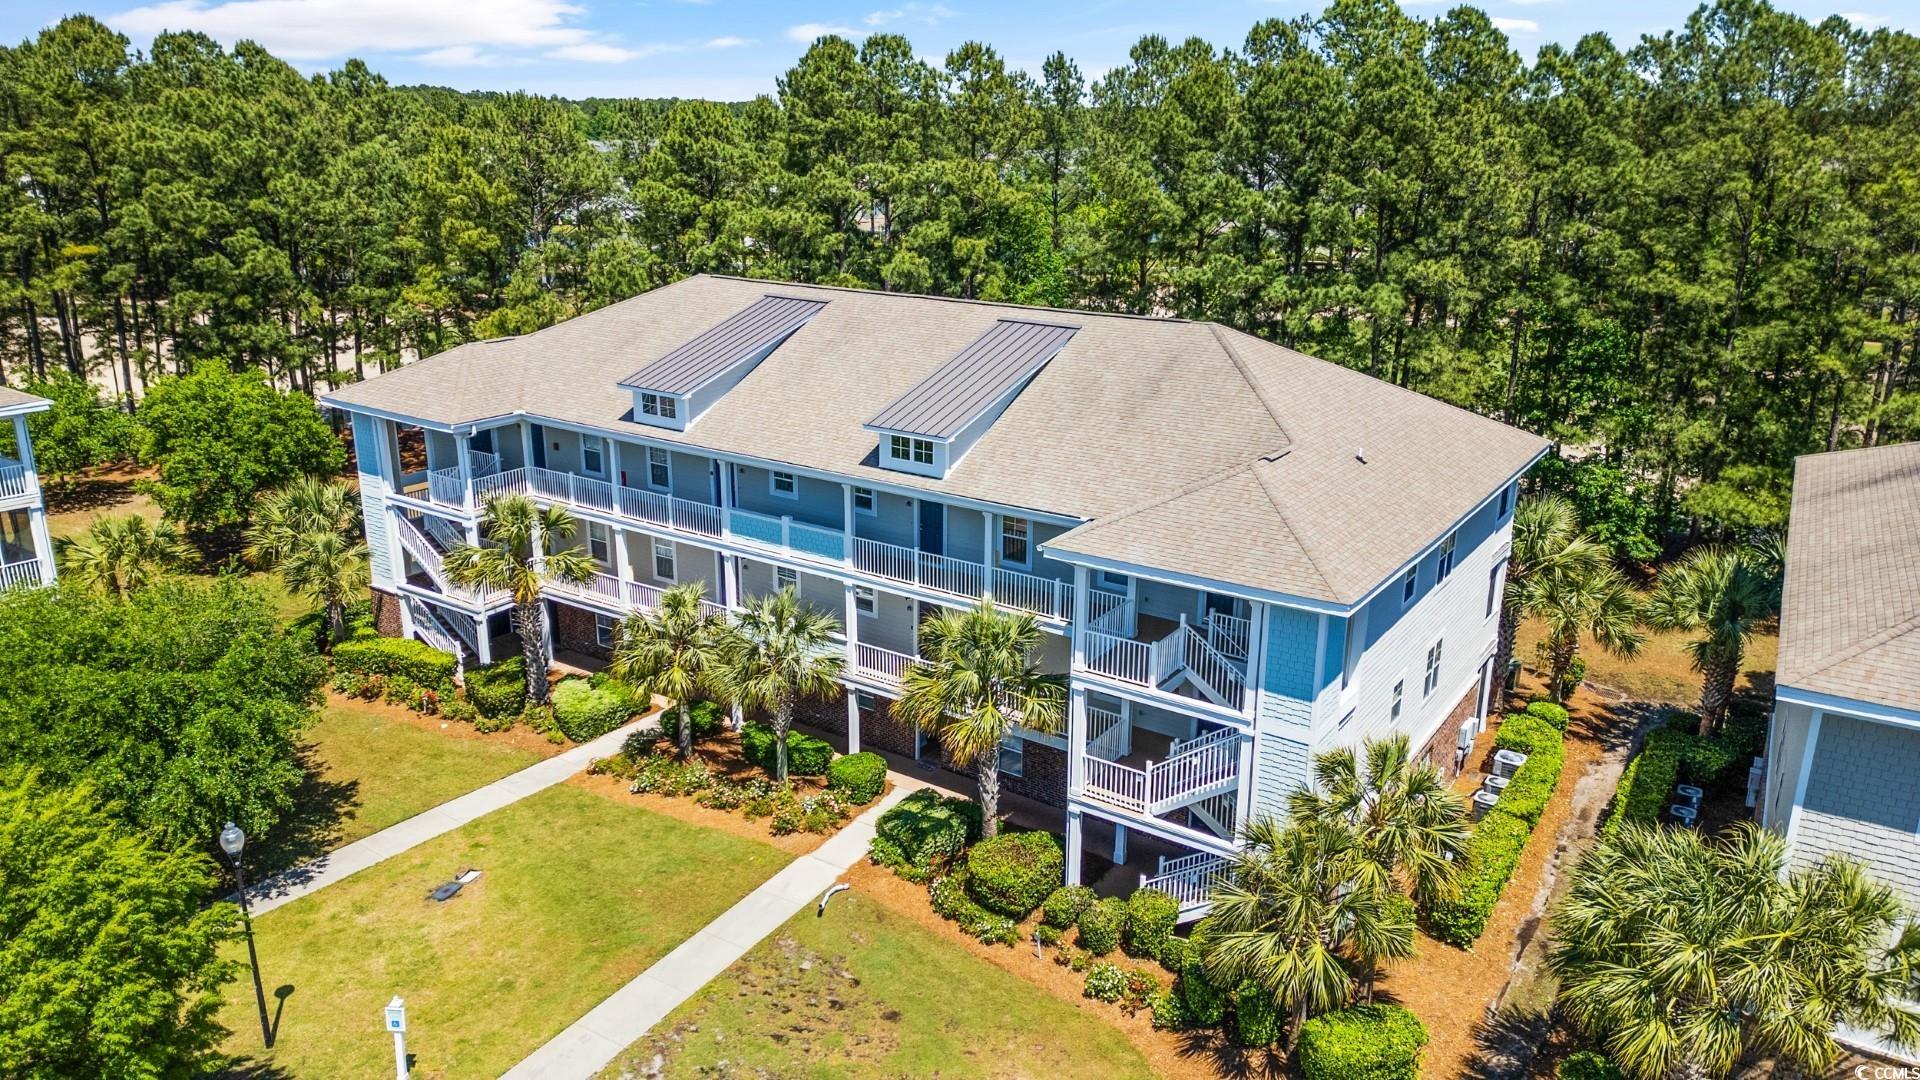 check out this meticulously kept unit at #433 willow bend, located within the prestigious barefoot resort community. this top-floor residence features 2 bedrooms and 2 full baths. upon entering, you'll be greeted by the expansive living spaces adorned with vaulted ceilings, creating an airy and inviting atmosphere. offering a tranquil setting, walk out to your private third-floor balcony and overlook one of the top golf courses in the country. this unit has never been rented, comes completely furnished, and has been well cared for and updated by the current owner.  as part of the willow bend community, residents enjoy access to a community pool, perfect for cooling off on warm days or socializing with neighbors. barefoot resort elevates luxury living with amenities such as a seasonal shuttle service for easy access to the area's attractions and amenities. don't miss the opportunity to check out this remarkable property today.